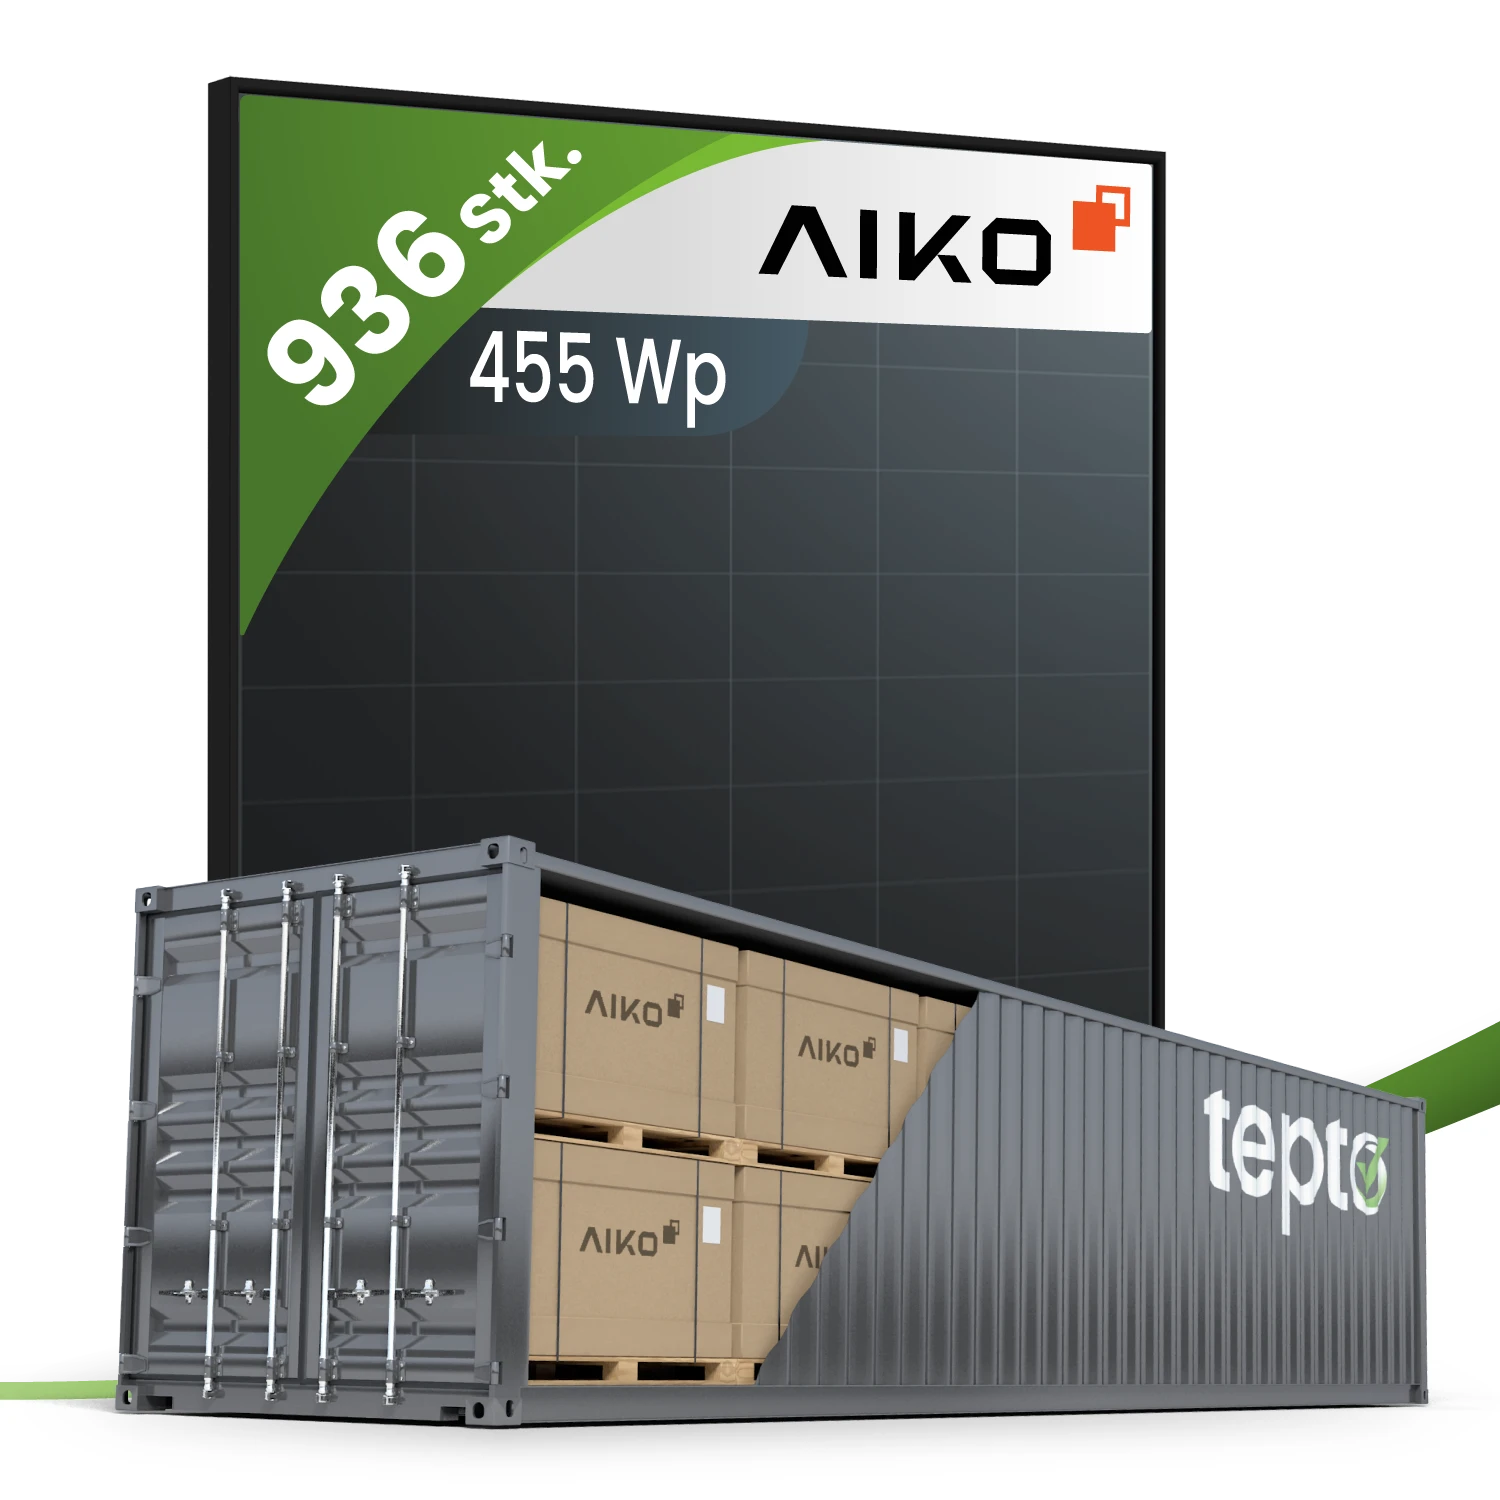 Aiko A455-MAH54Mb/455Wp Neostar 2S monofazial Fullblack (Container)